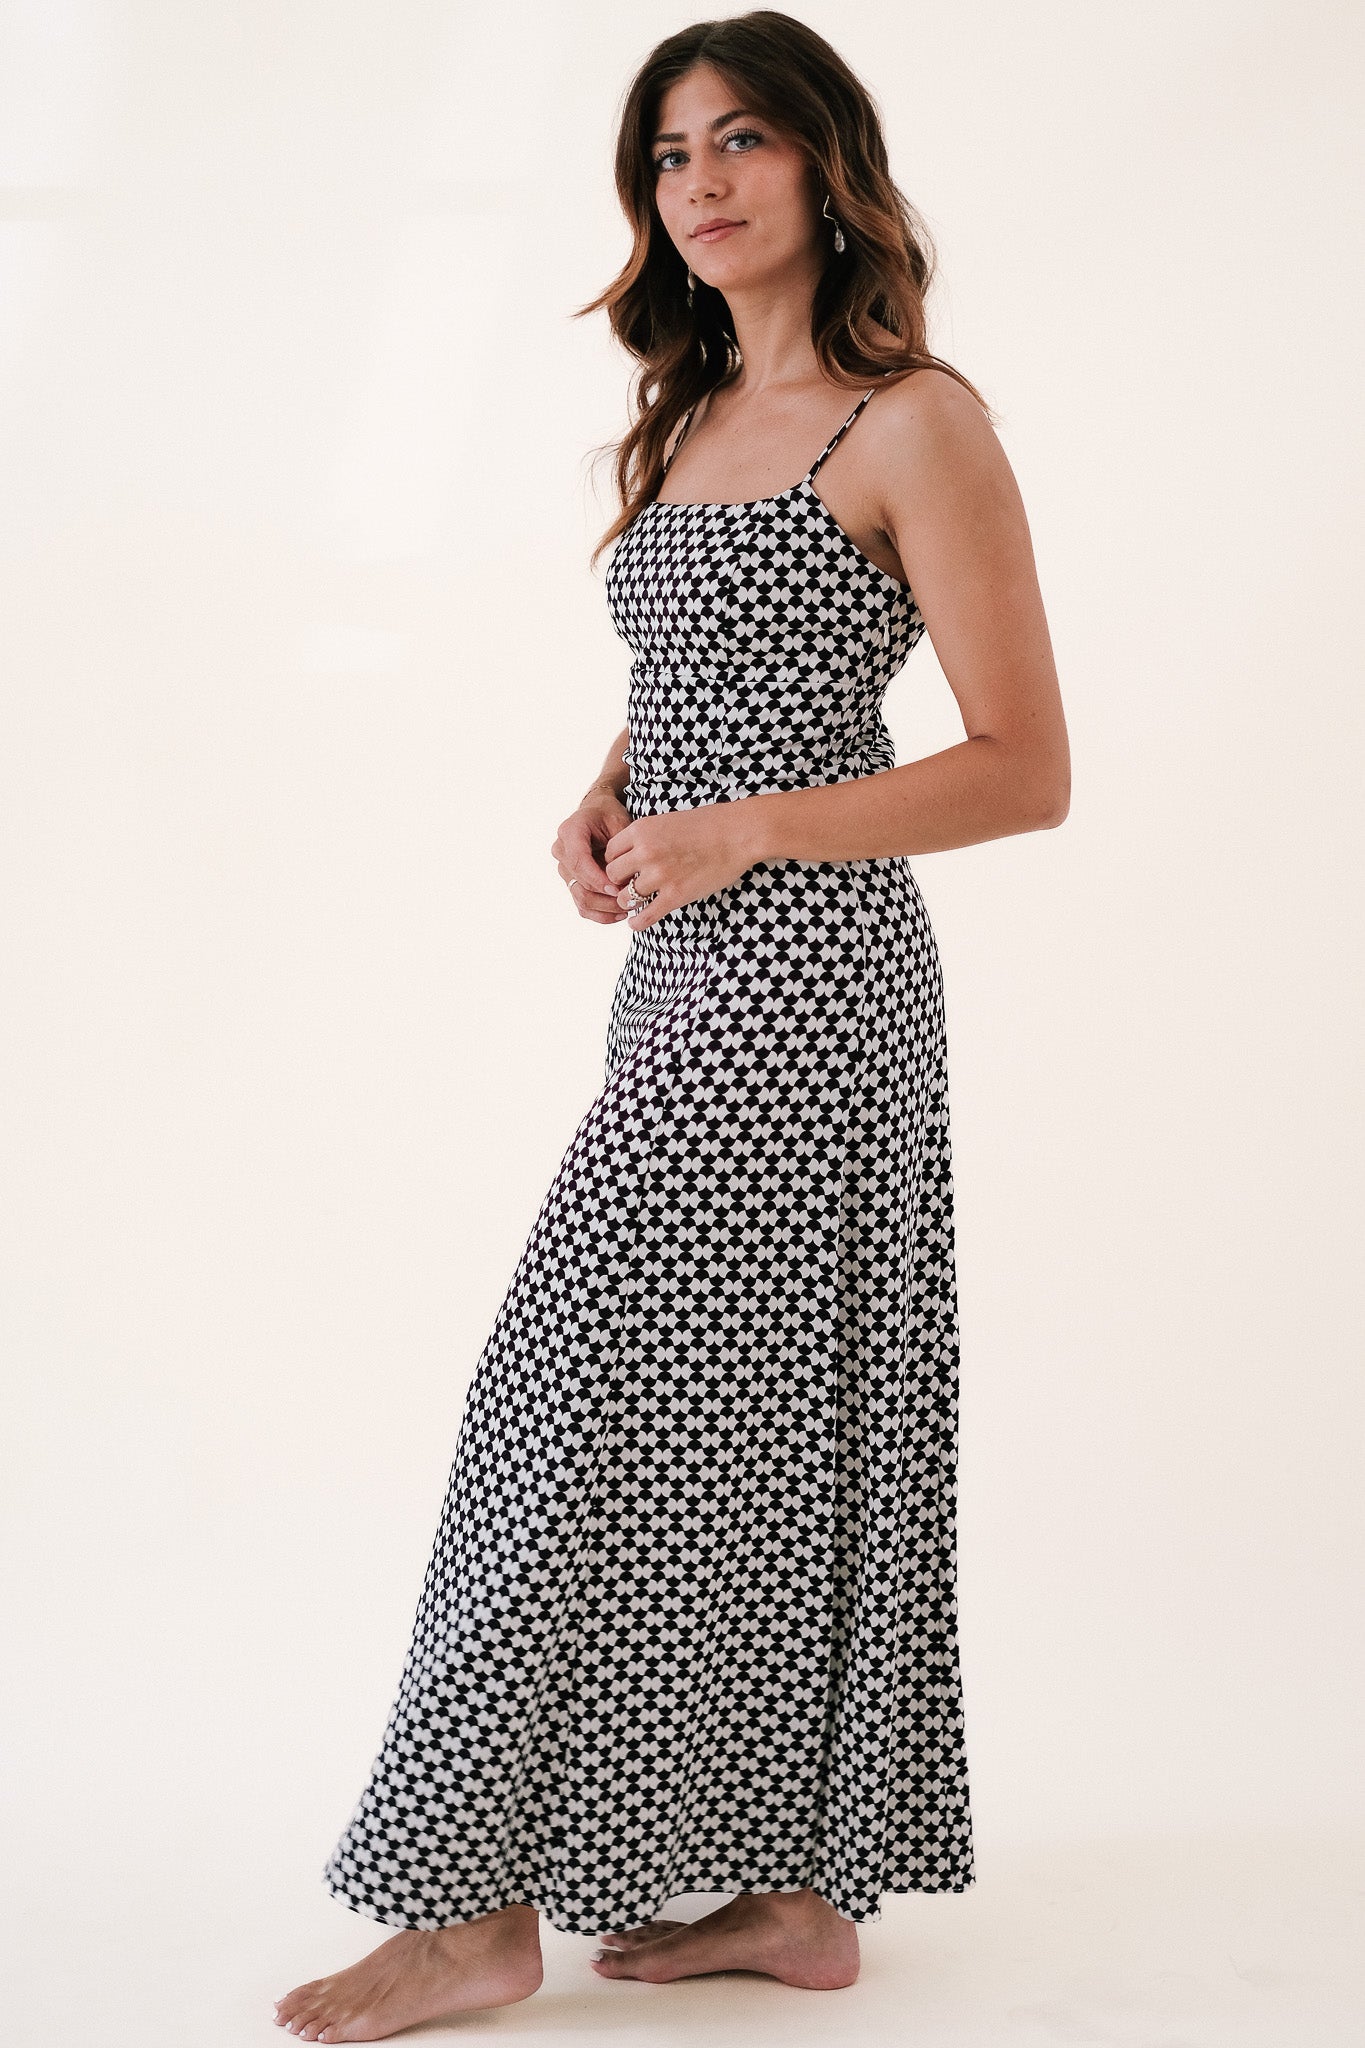 Lucy Paris Claflin Black and White Patterned Sleeveless Maxi Dress